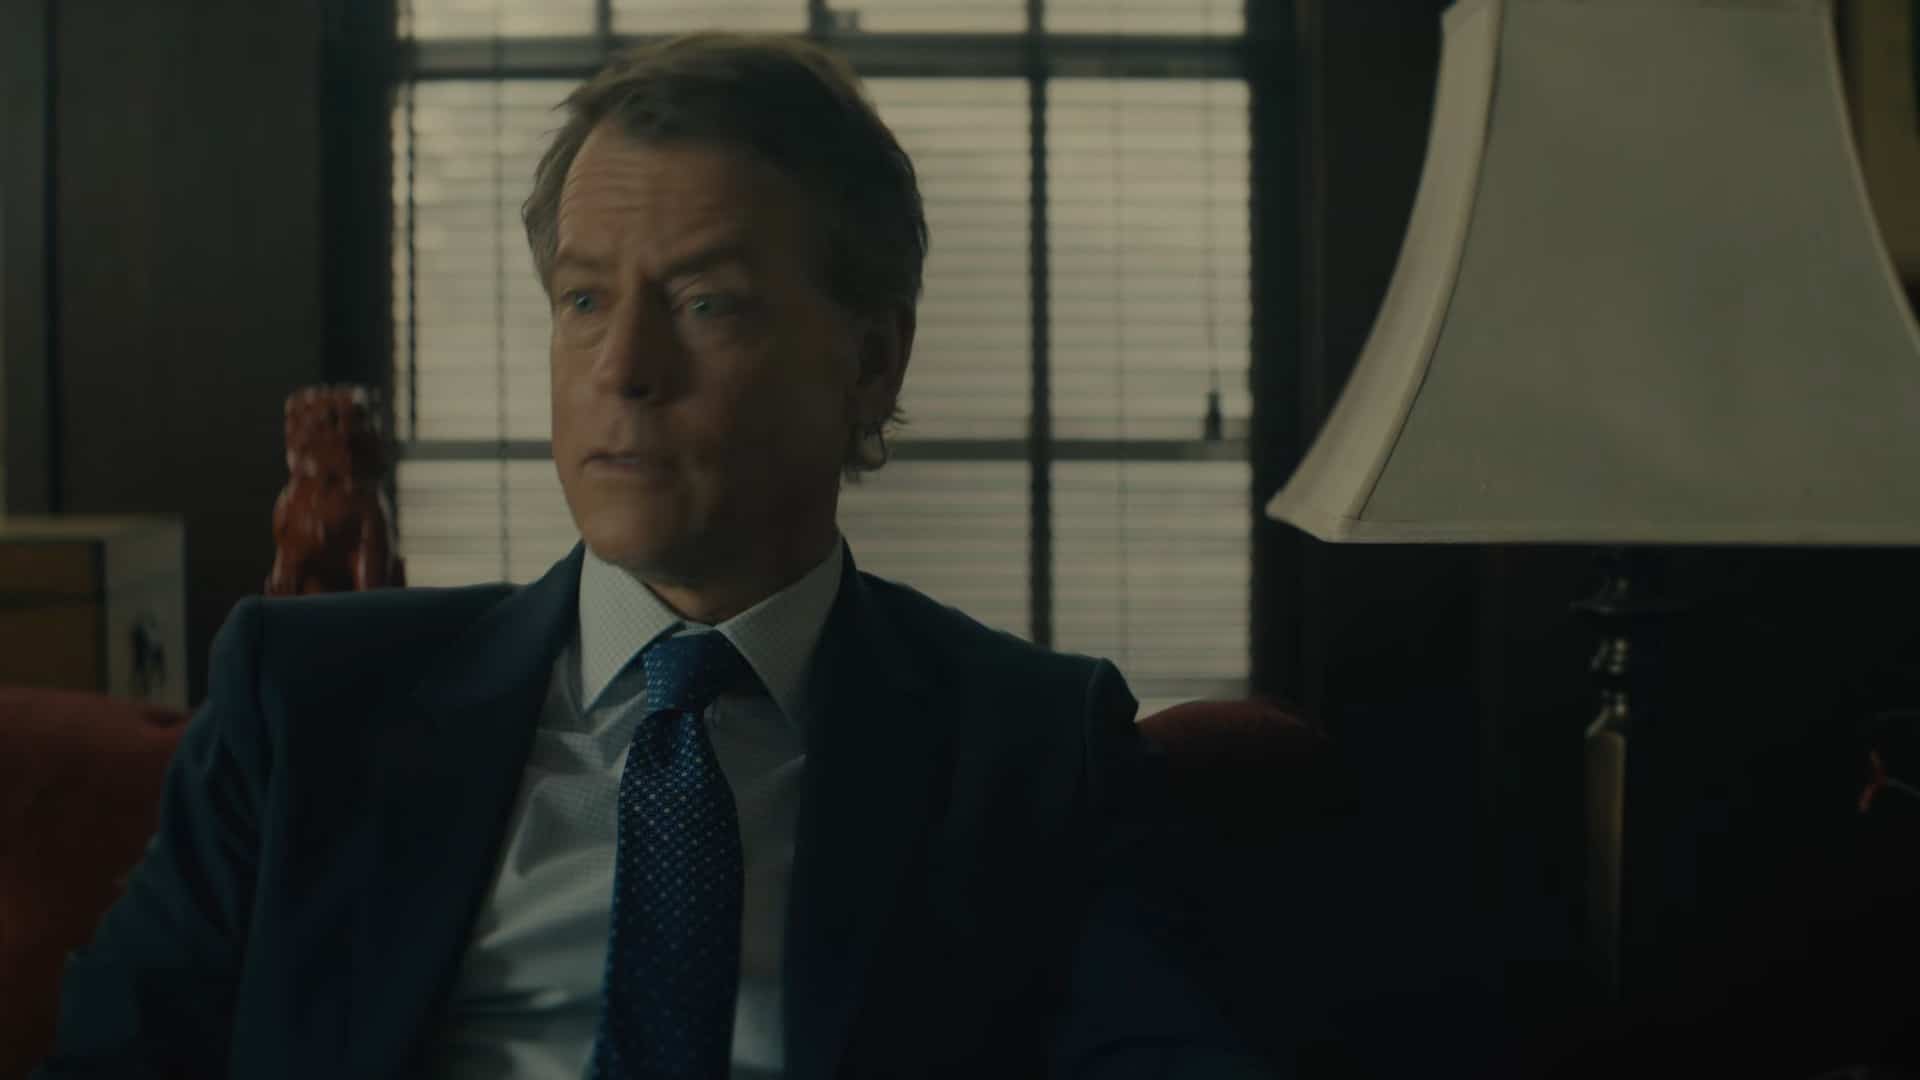 Terry (Greg Kinnear) in marriage counseling